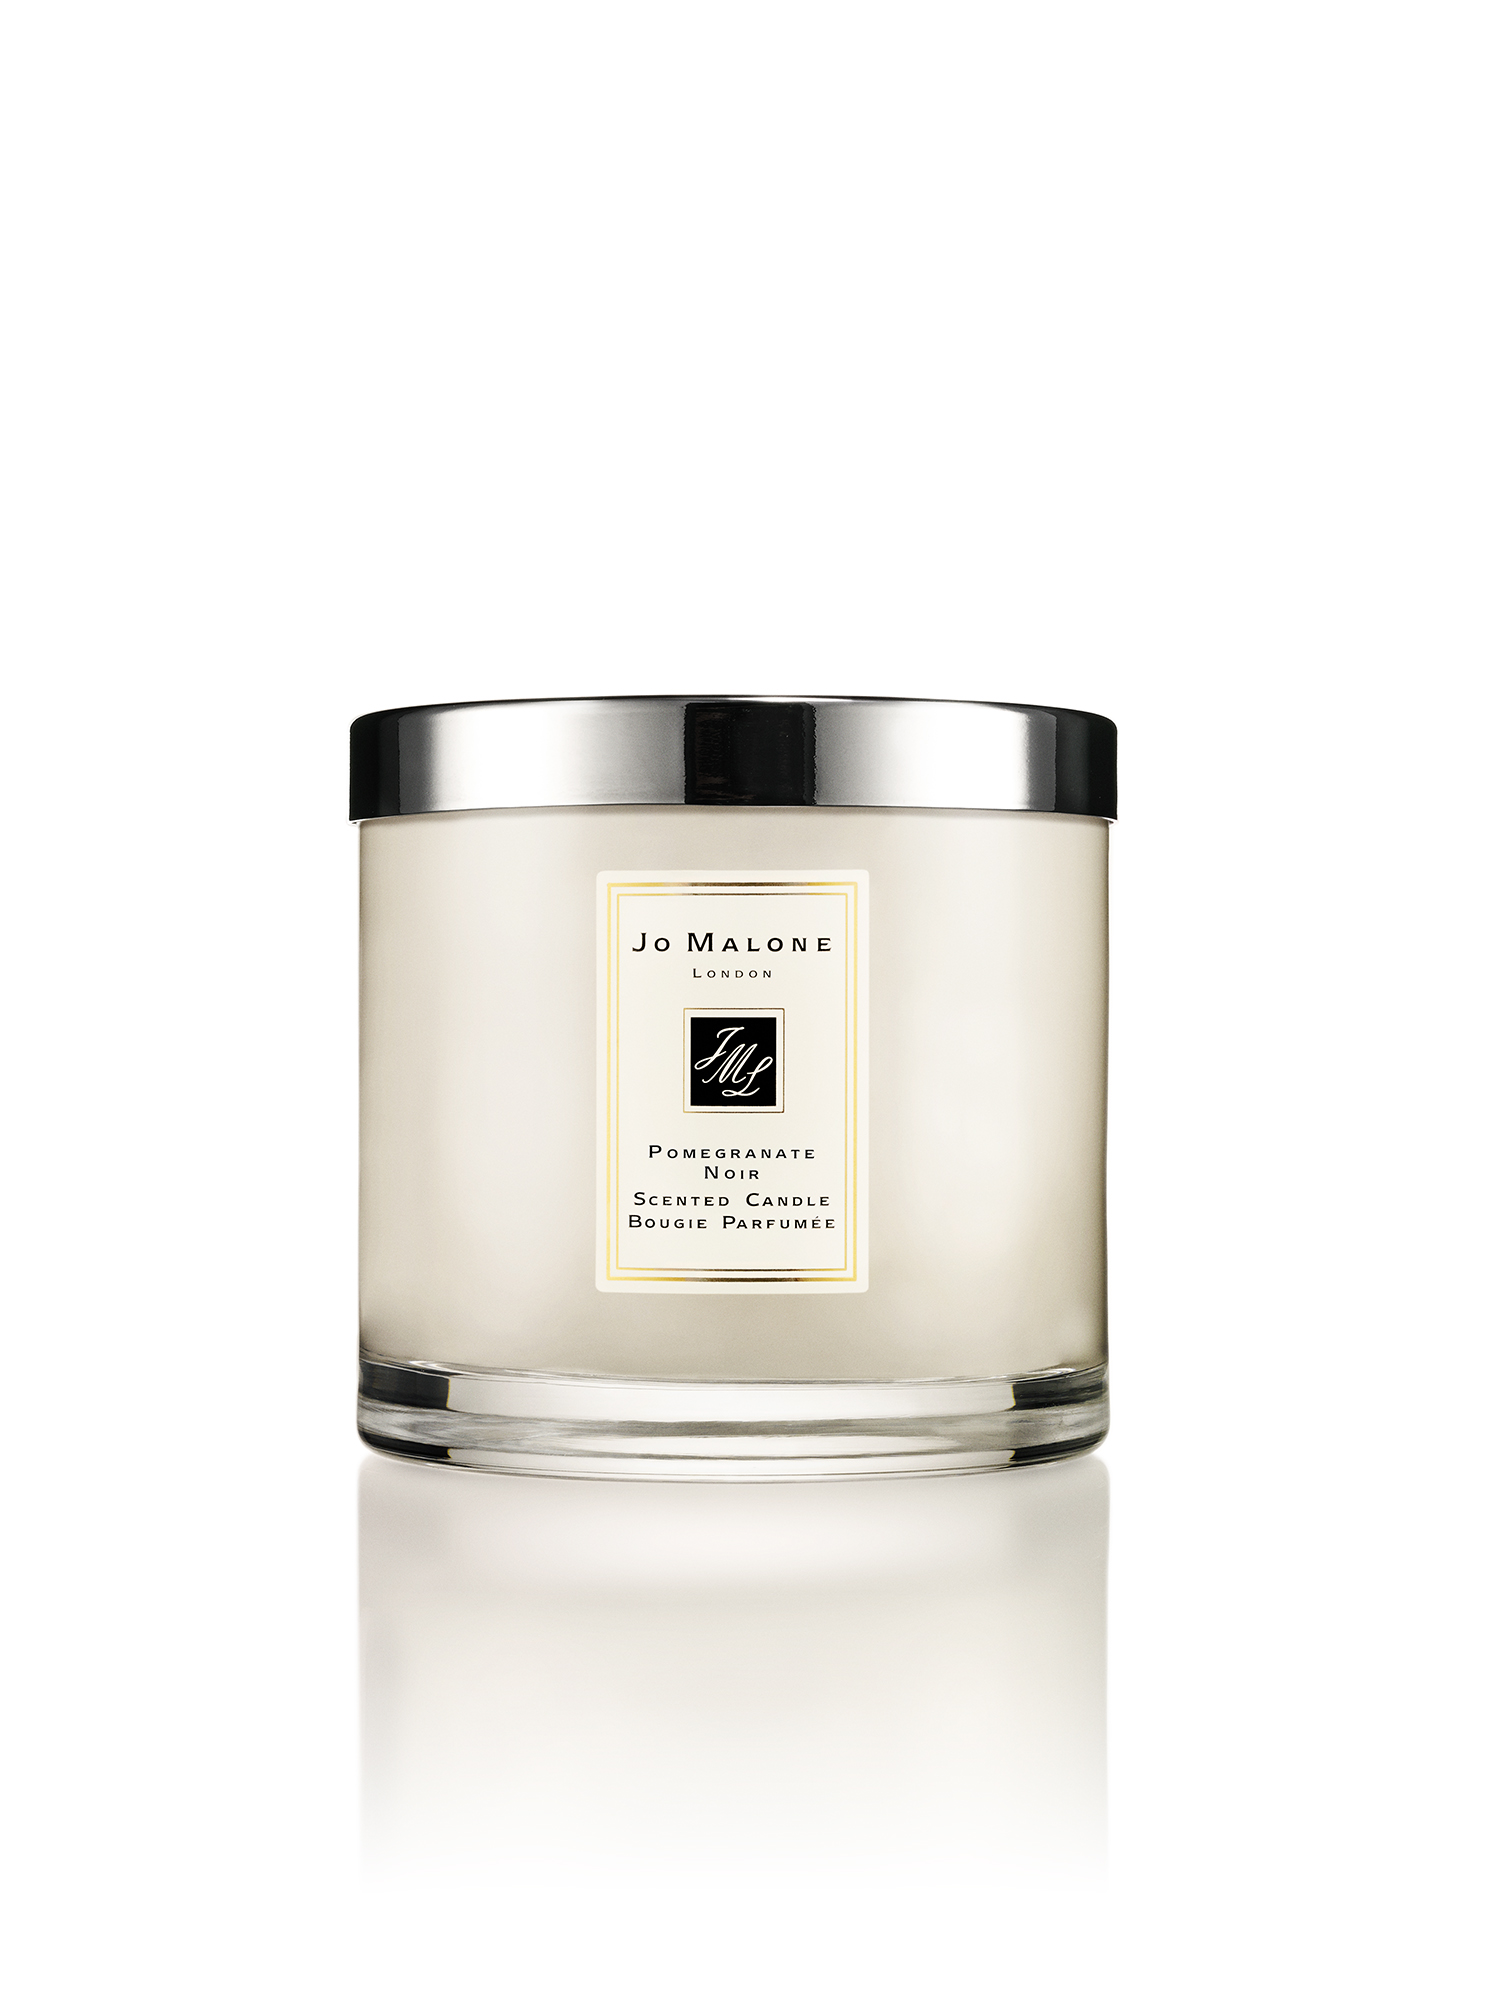 Jo Malone London Pomegranate Noir Deluxe Candle 600g